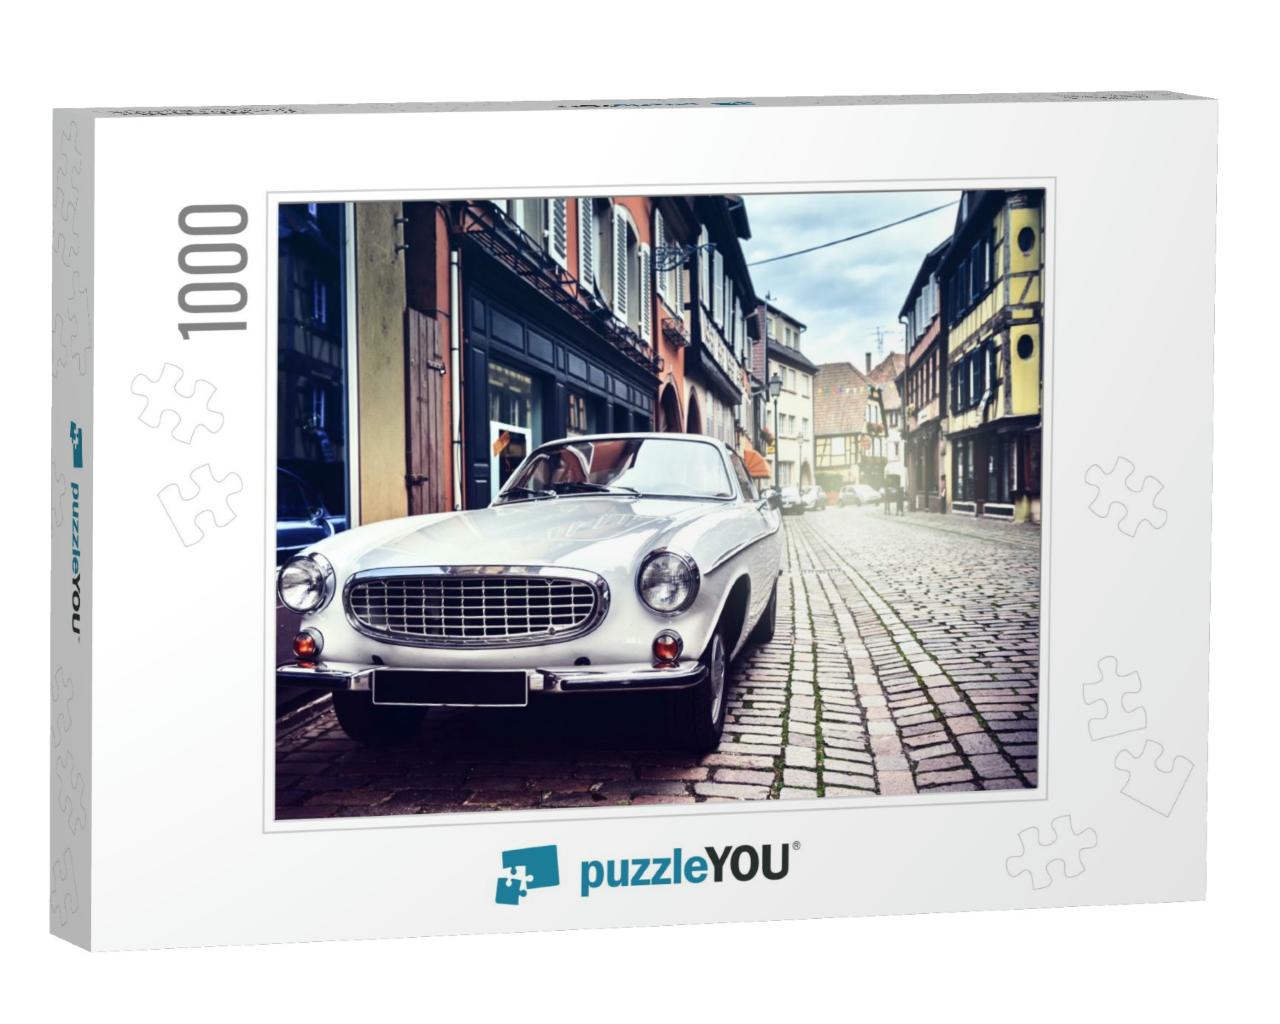 Retro Car Parked in Old European City Street... Jigsaw Puzzle with 1000 pieces